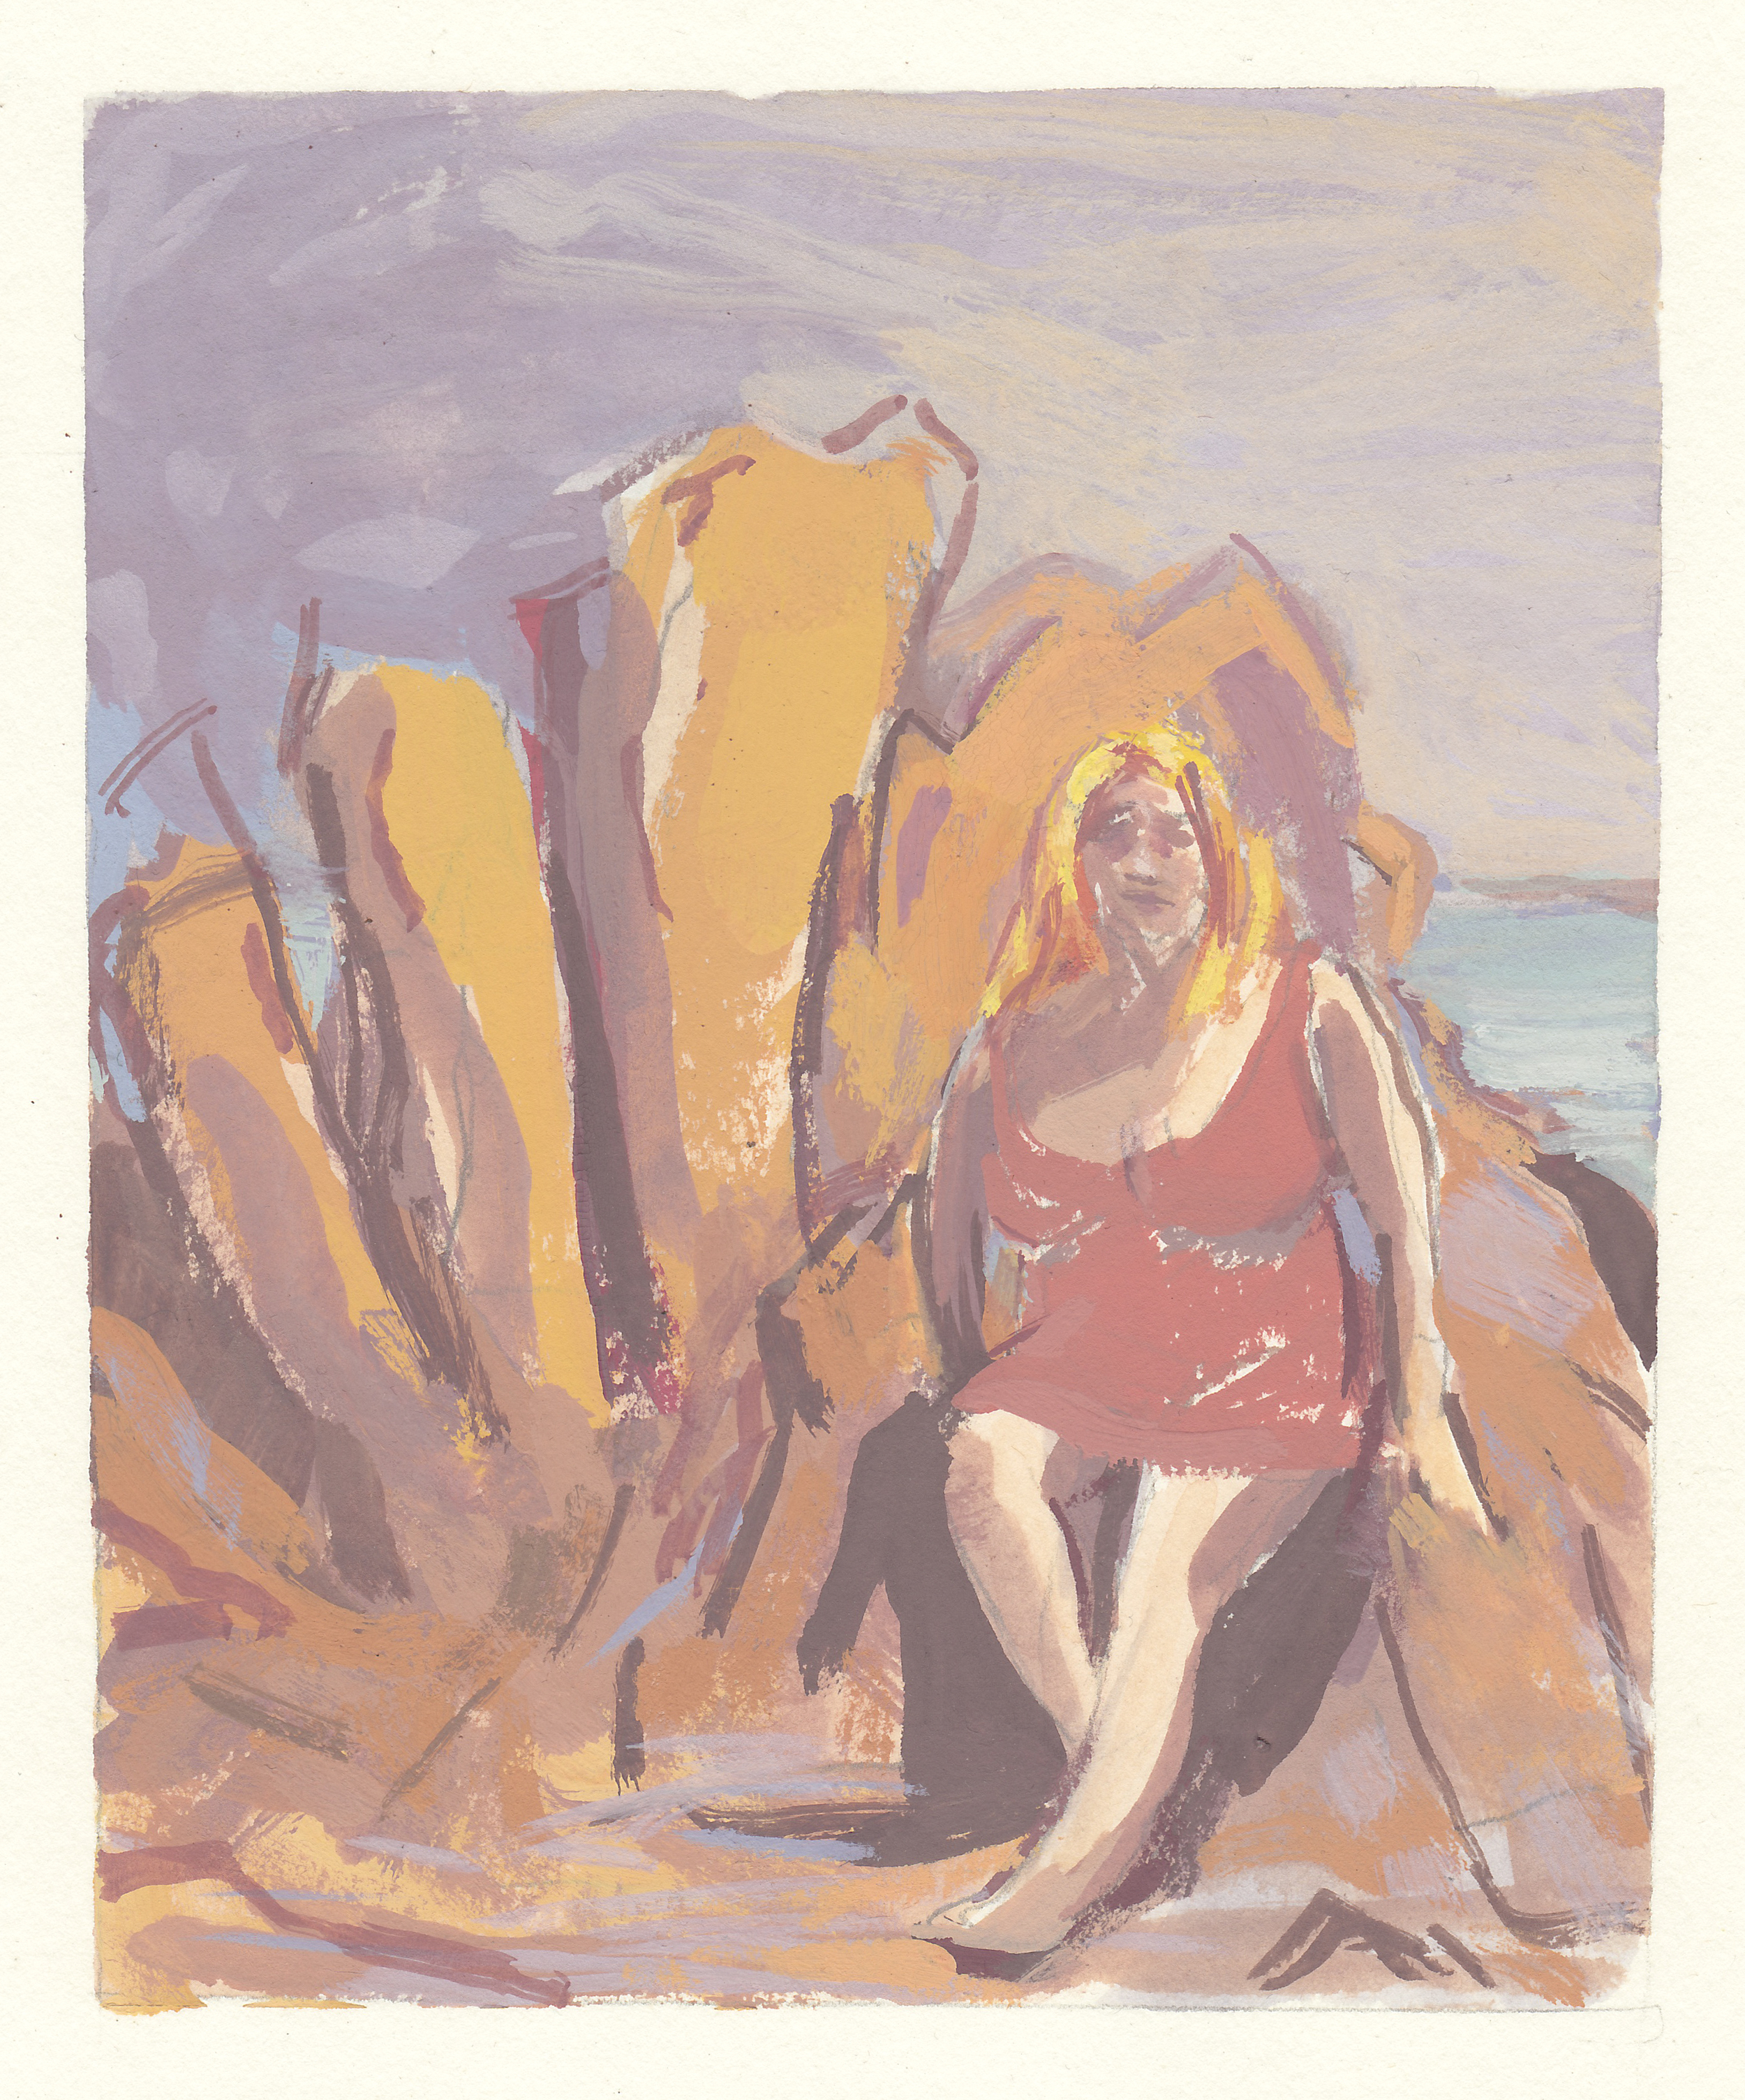    Patsy     gouache 4.25x5.25" 2014  private collection 